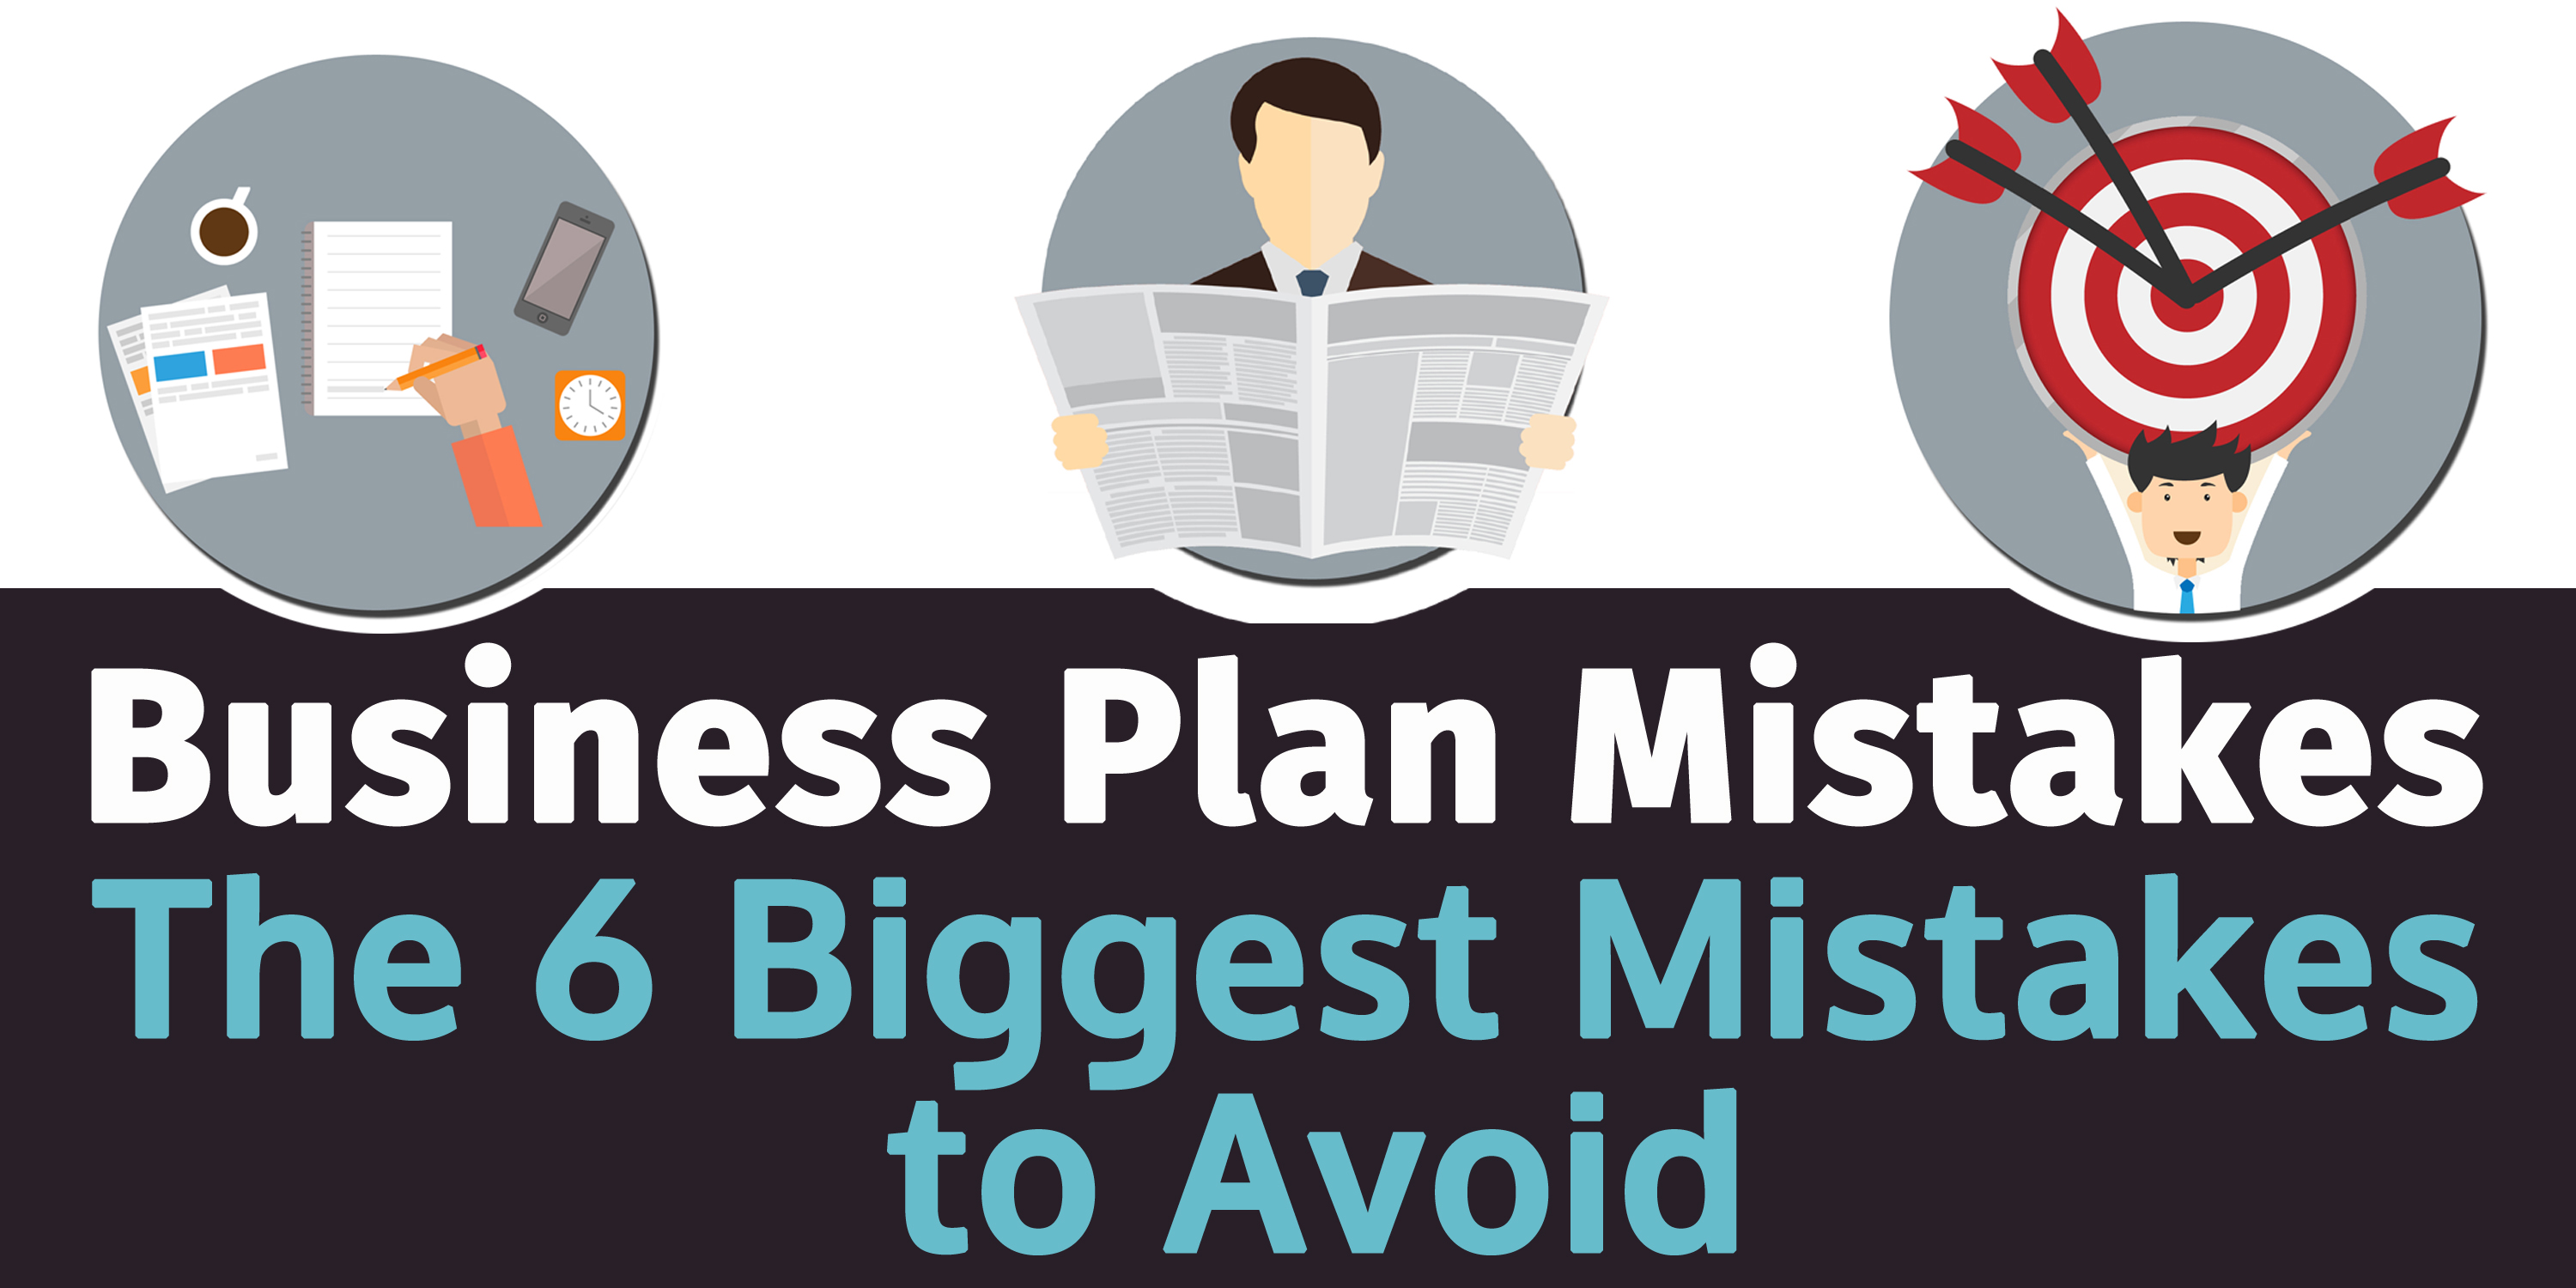 Business-Plan-Mistakes-Header-New